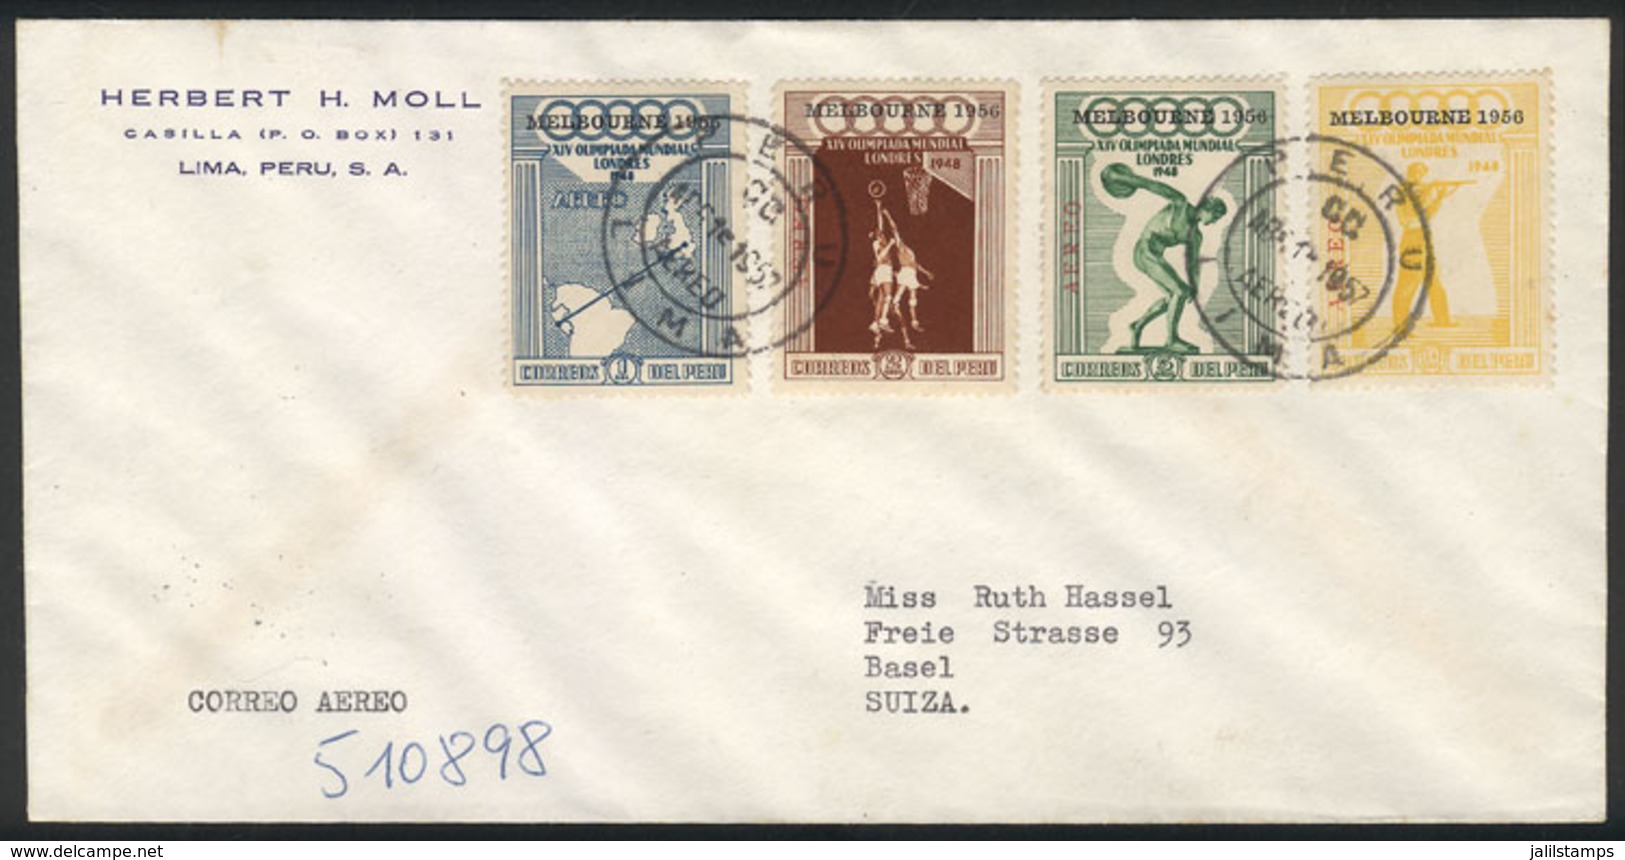 PERU: Yv.116/119, 1956 Melbourne Olympic Games, Cmpl. Set Used On Cover Flown From Lima To Basel On 15/AP/1957, ONLY DAY - Peru